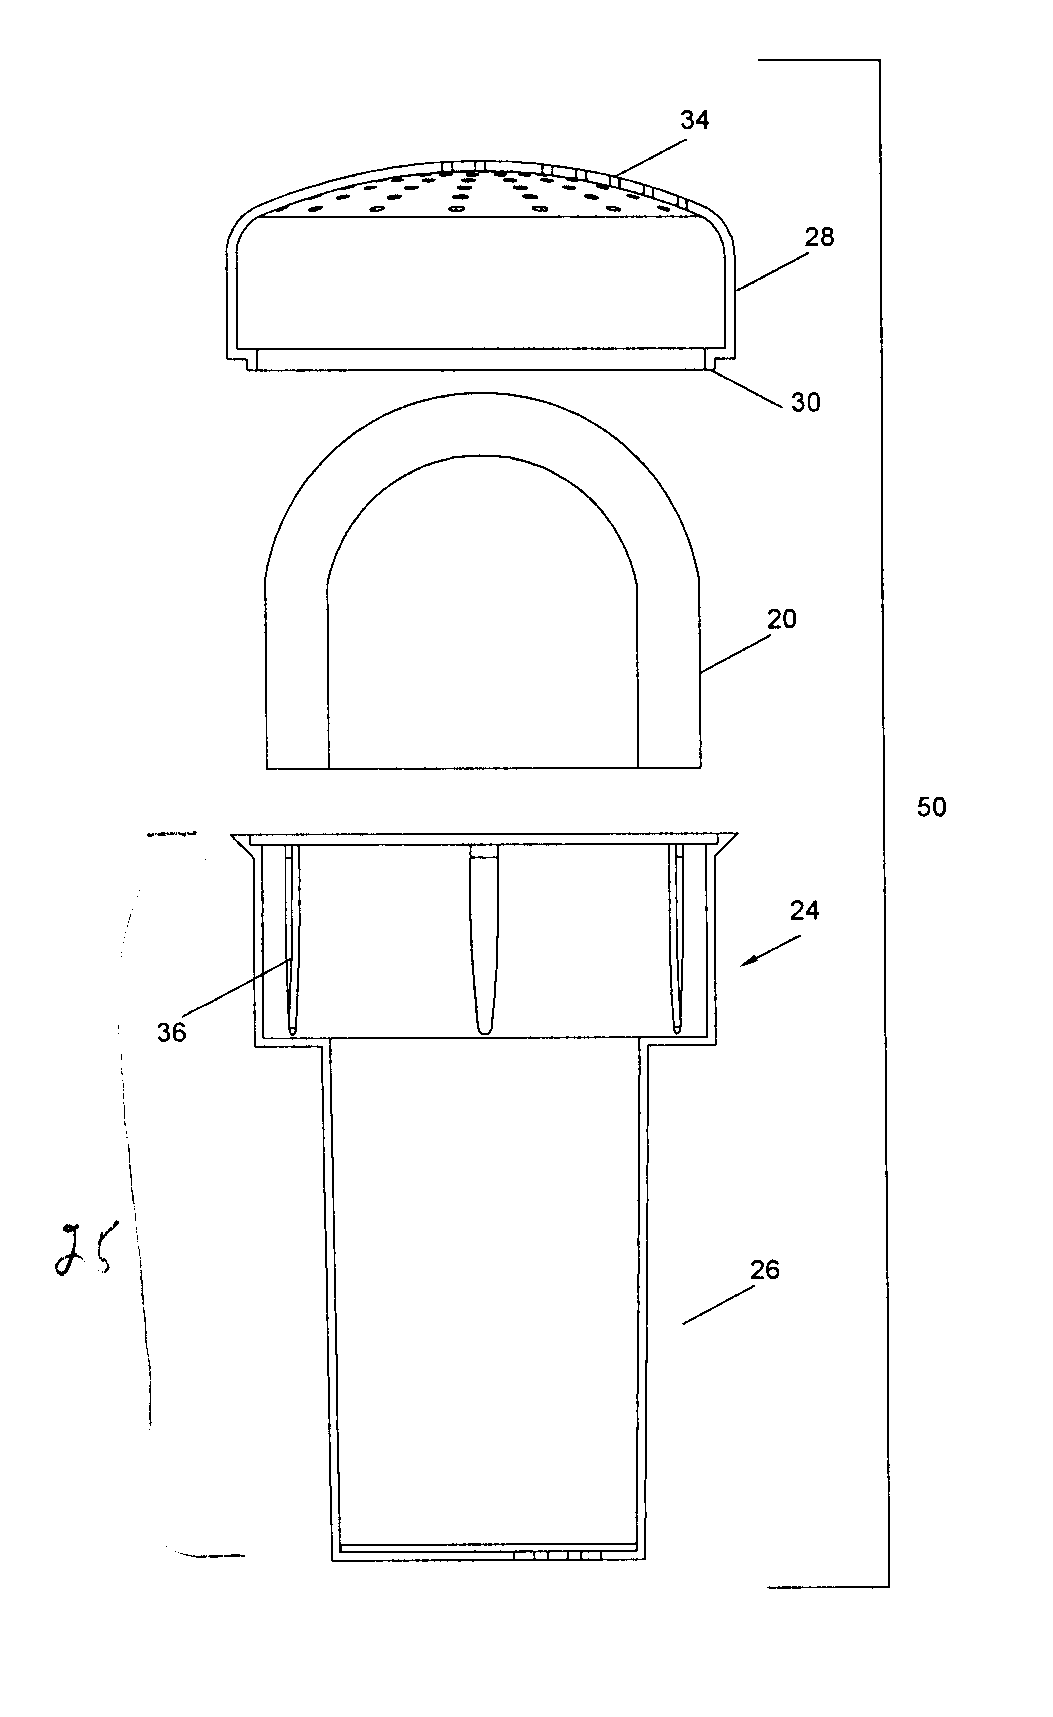 Filter cartridge for gravity-fed water treatment device